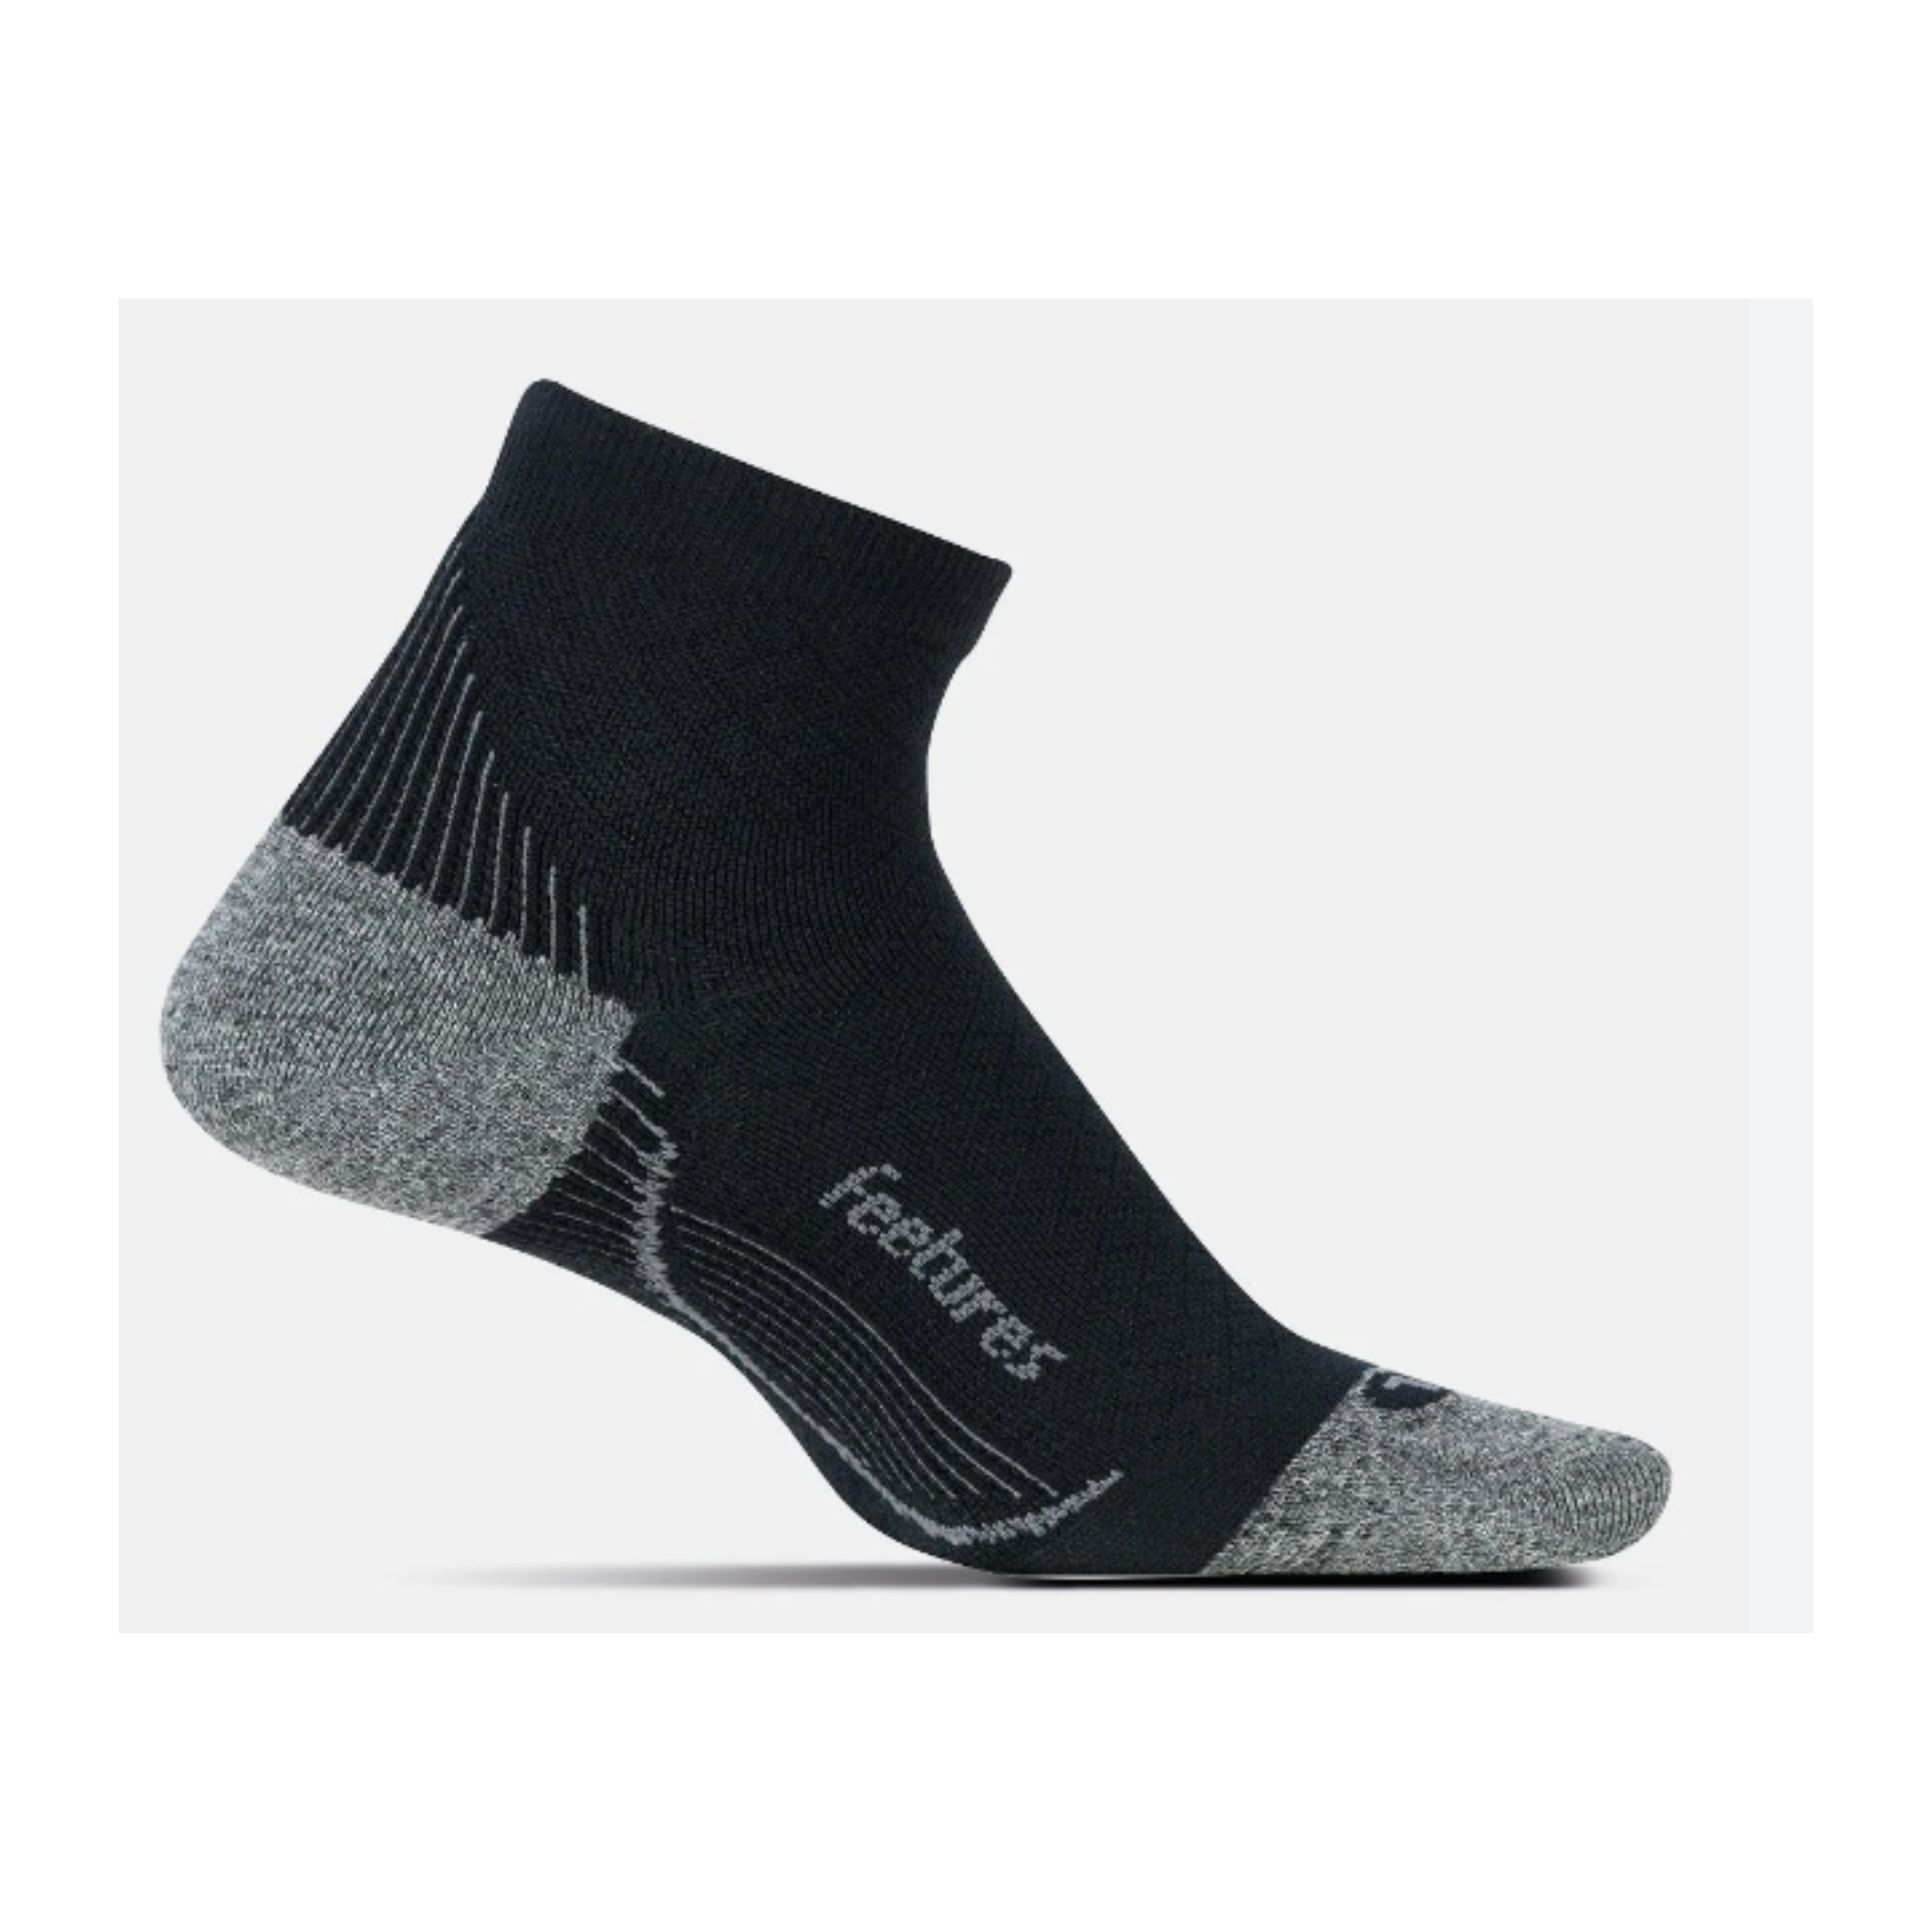 UFS Plantar Fasciitis Compression Sock - The Ultimate Foot Store